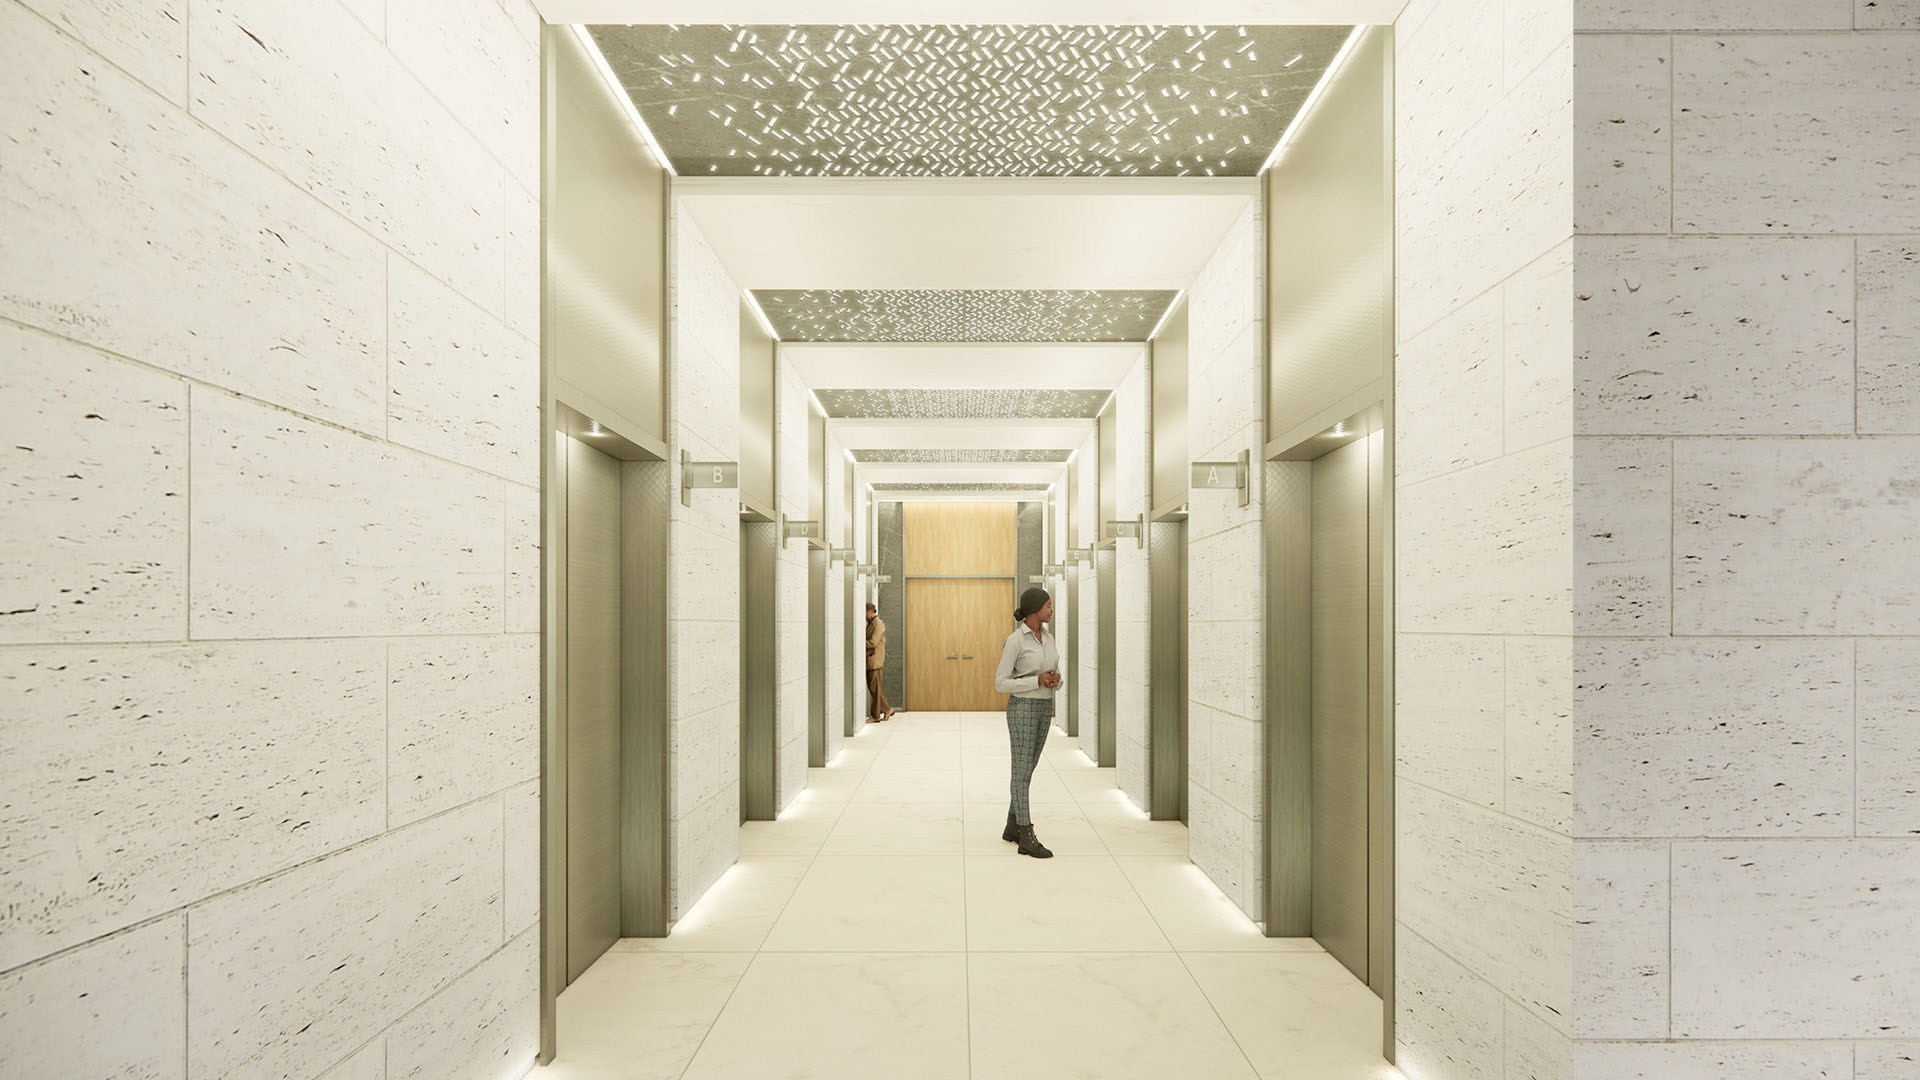 DLF Downtown Chennai Is Equipped With Modern Elevator Lift Lobby Best Office Space In Taramani

